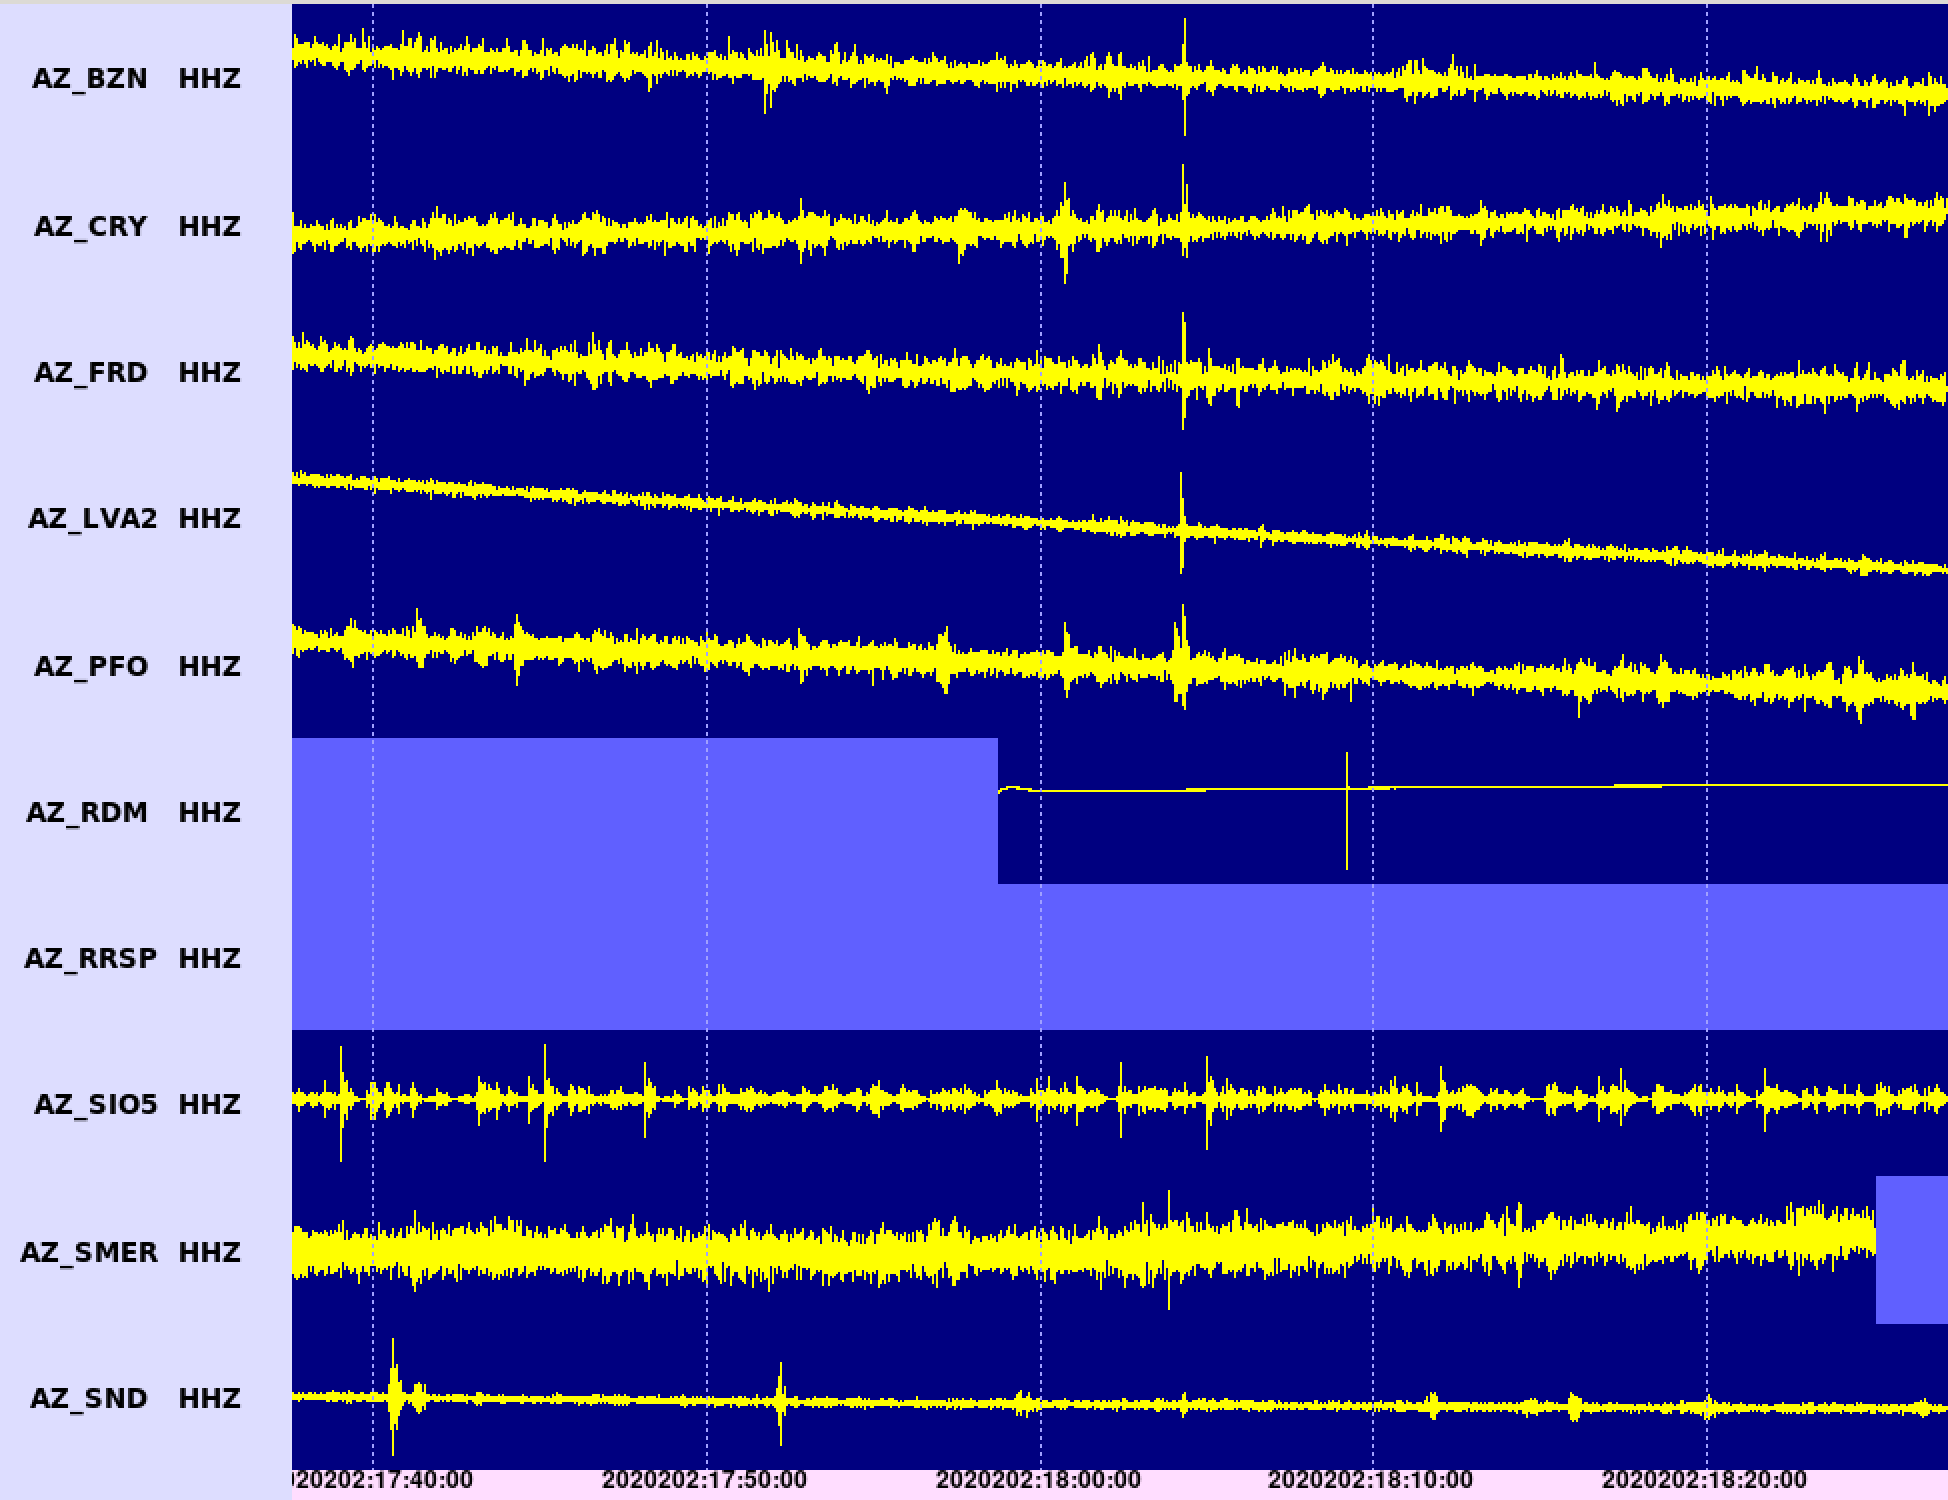 Seismic traces updated in real-time